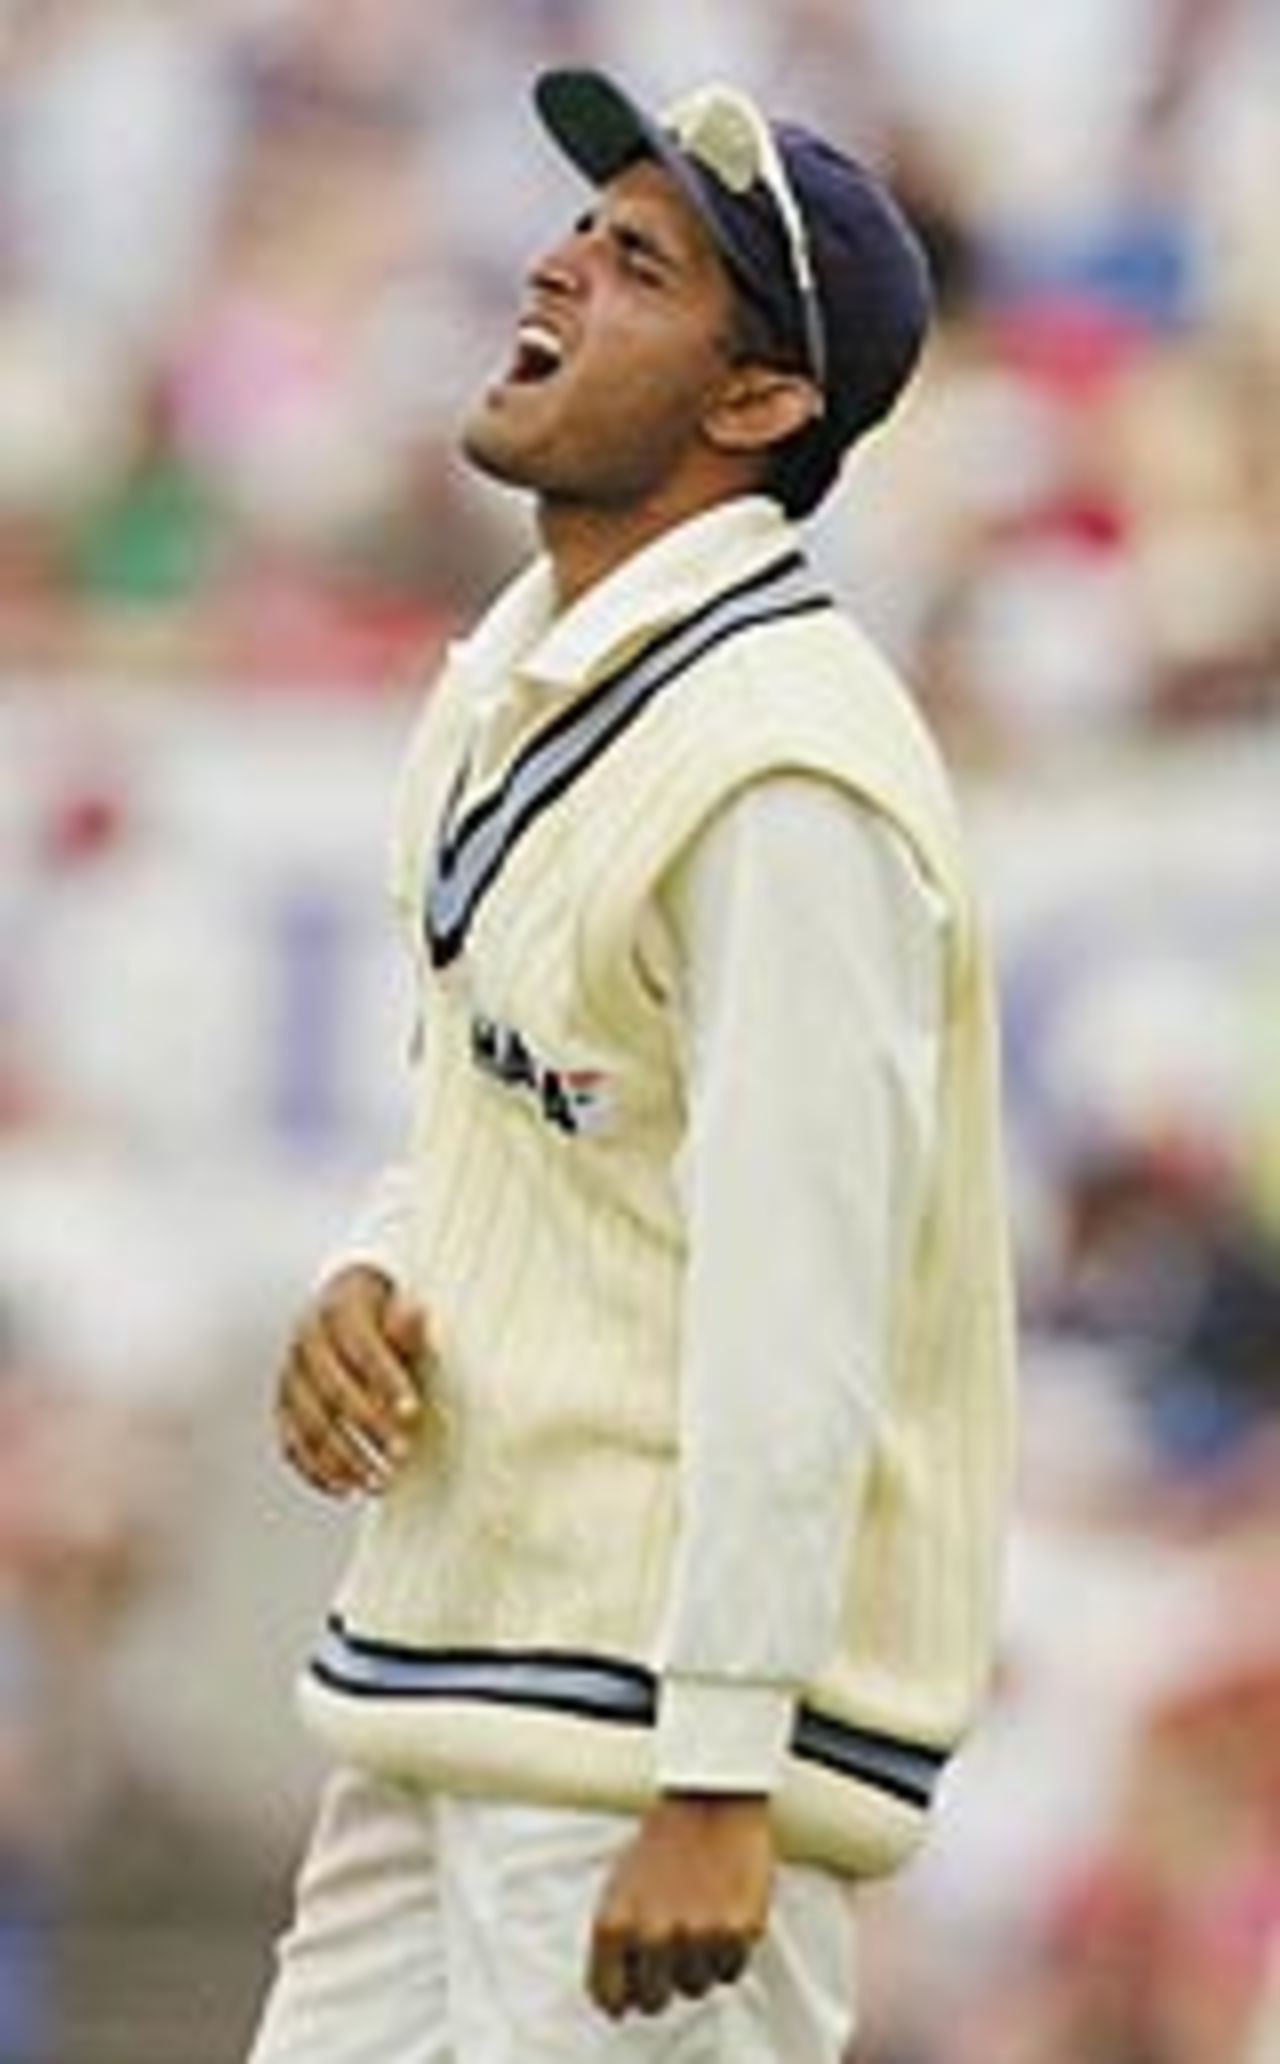 Sourav Ganguly cries out in pain after injuring his shoulder, Australia v India, 4th Test, Sydney, 5th day, January 6, 2004